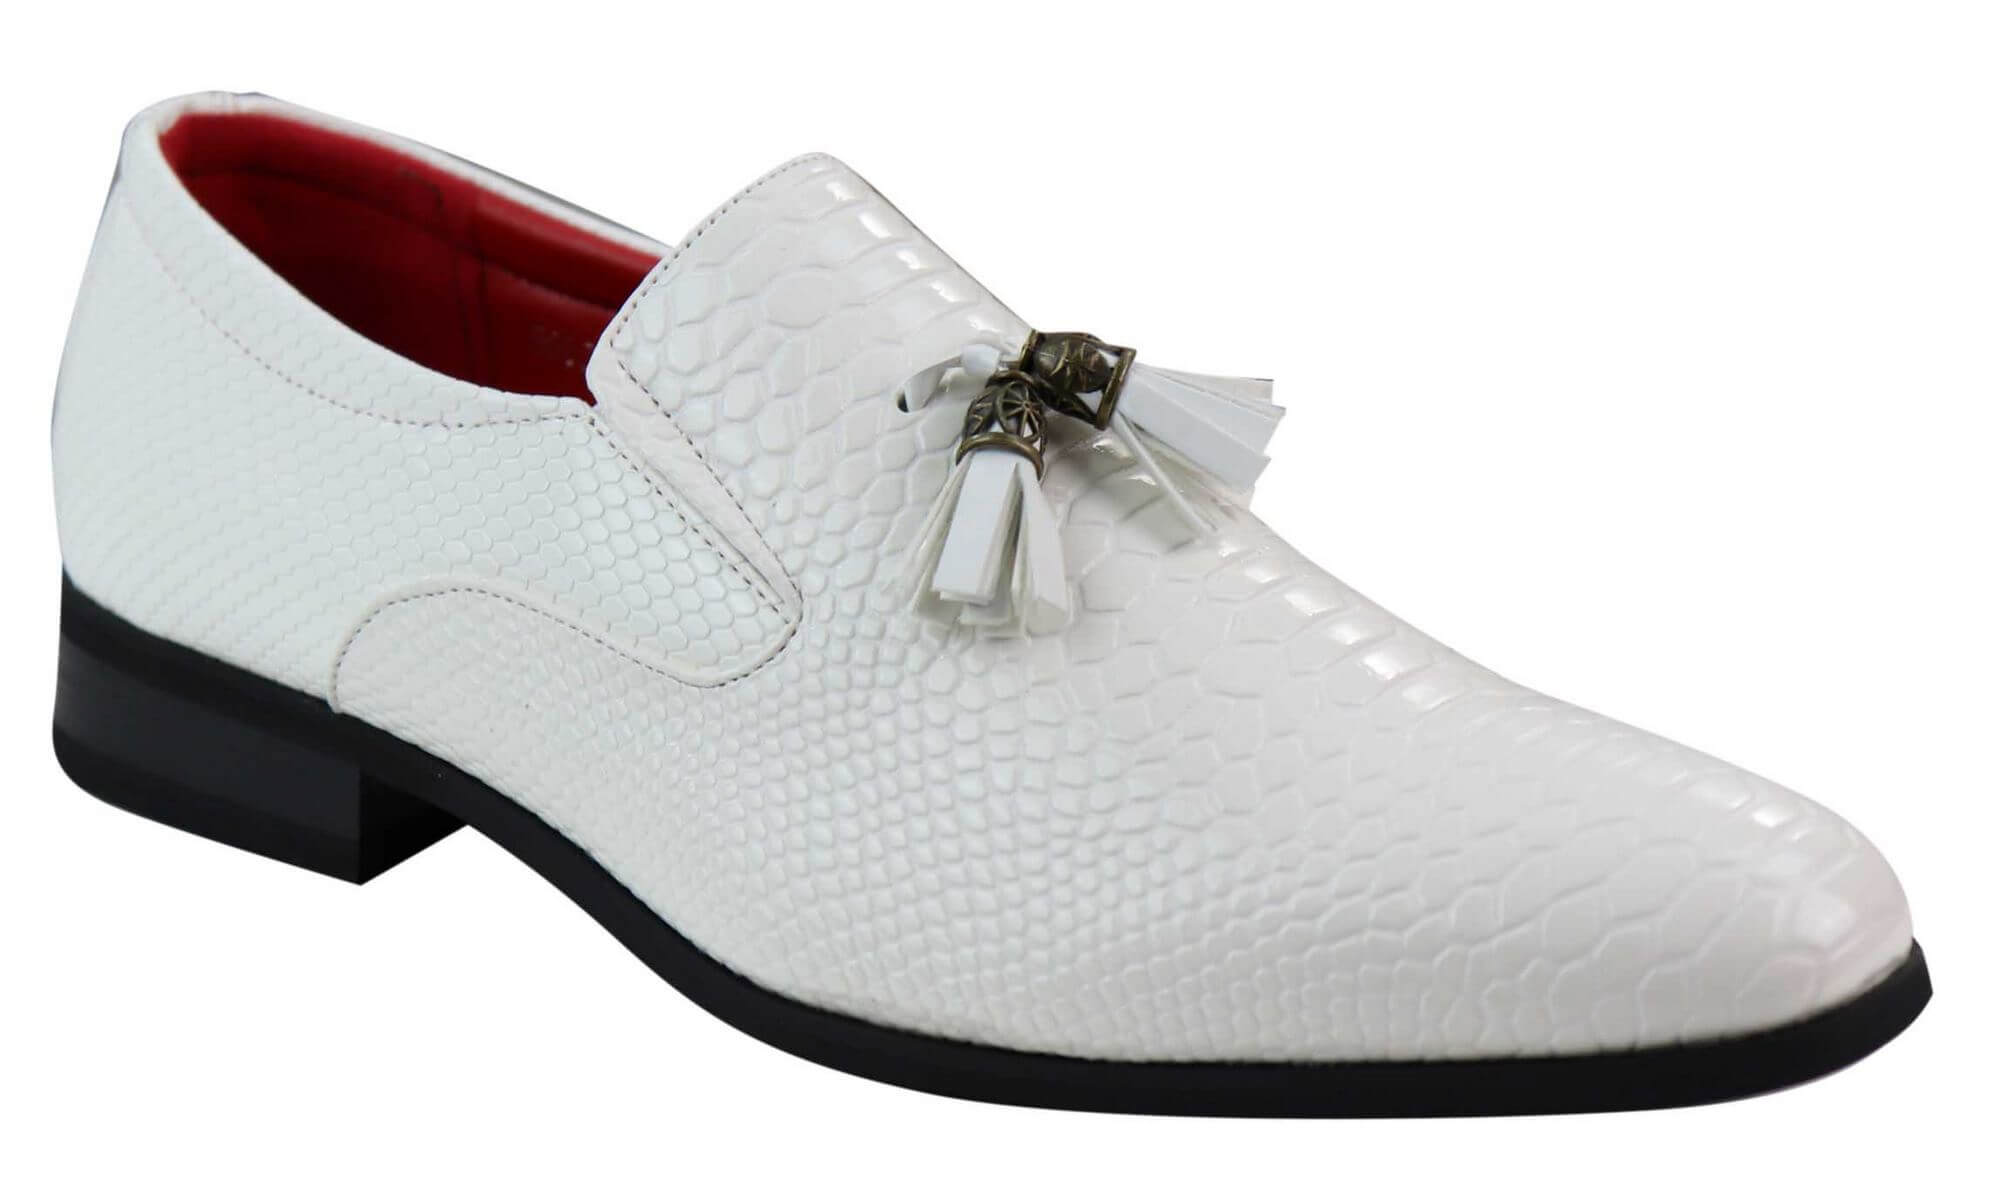 Mens Snake Skin Style PU Leather Shoes: Buy Online - Happy Gentleman United States